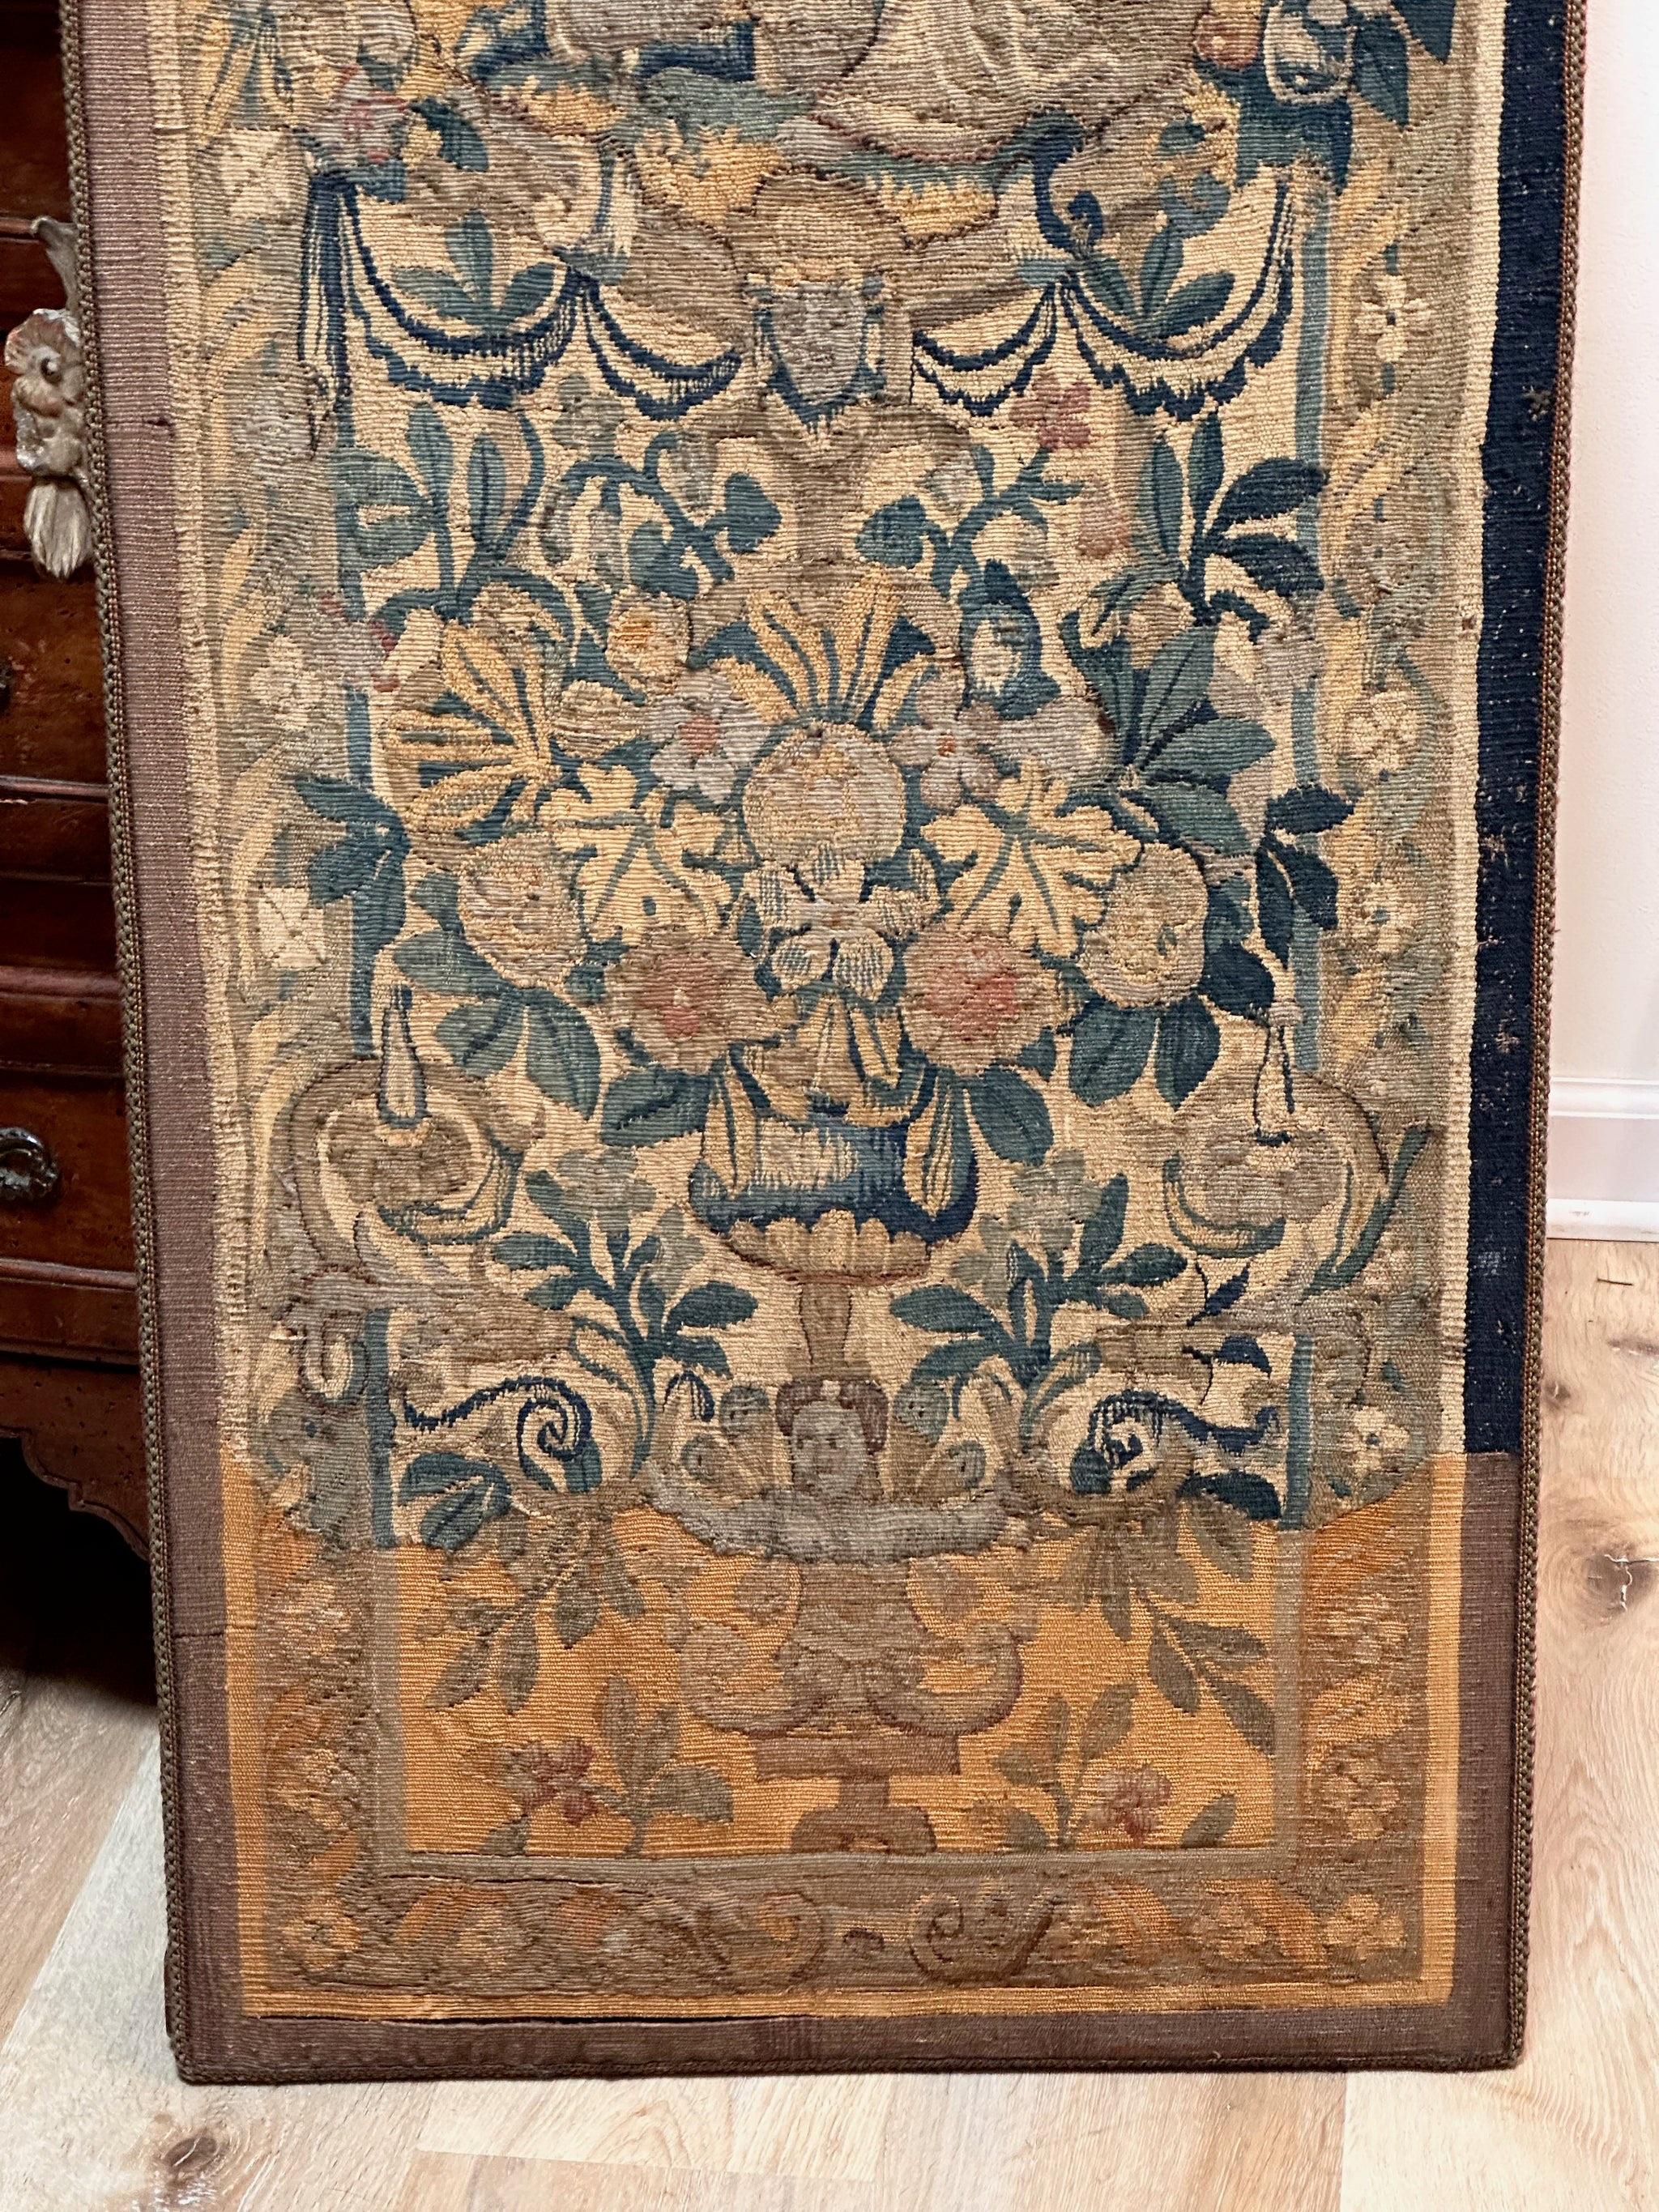 Mounted 17th Century Flemish tapestry panel having finely woven foliate designs with cherubs, a maiden, a landscape over a vase of flowers.  Fine detail and lovely color.
